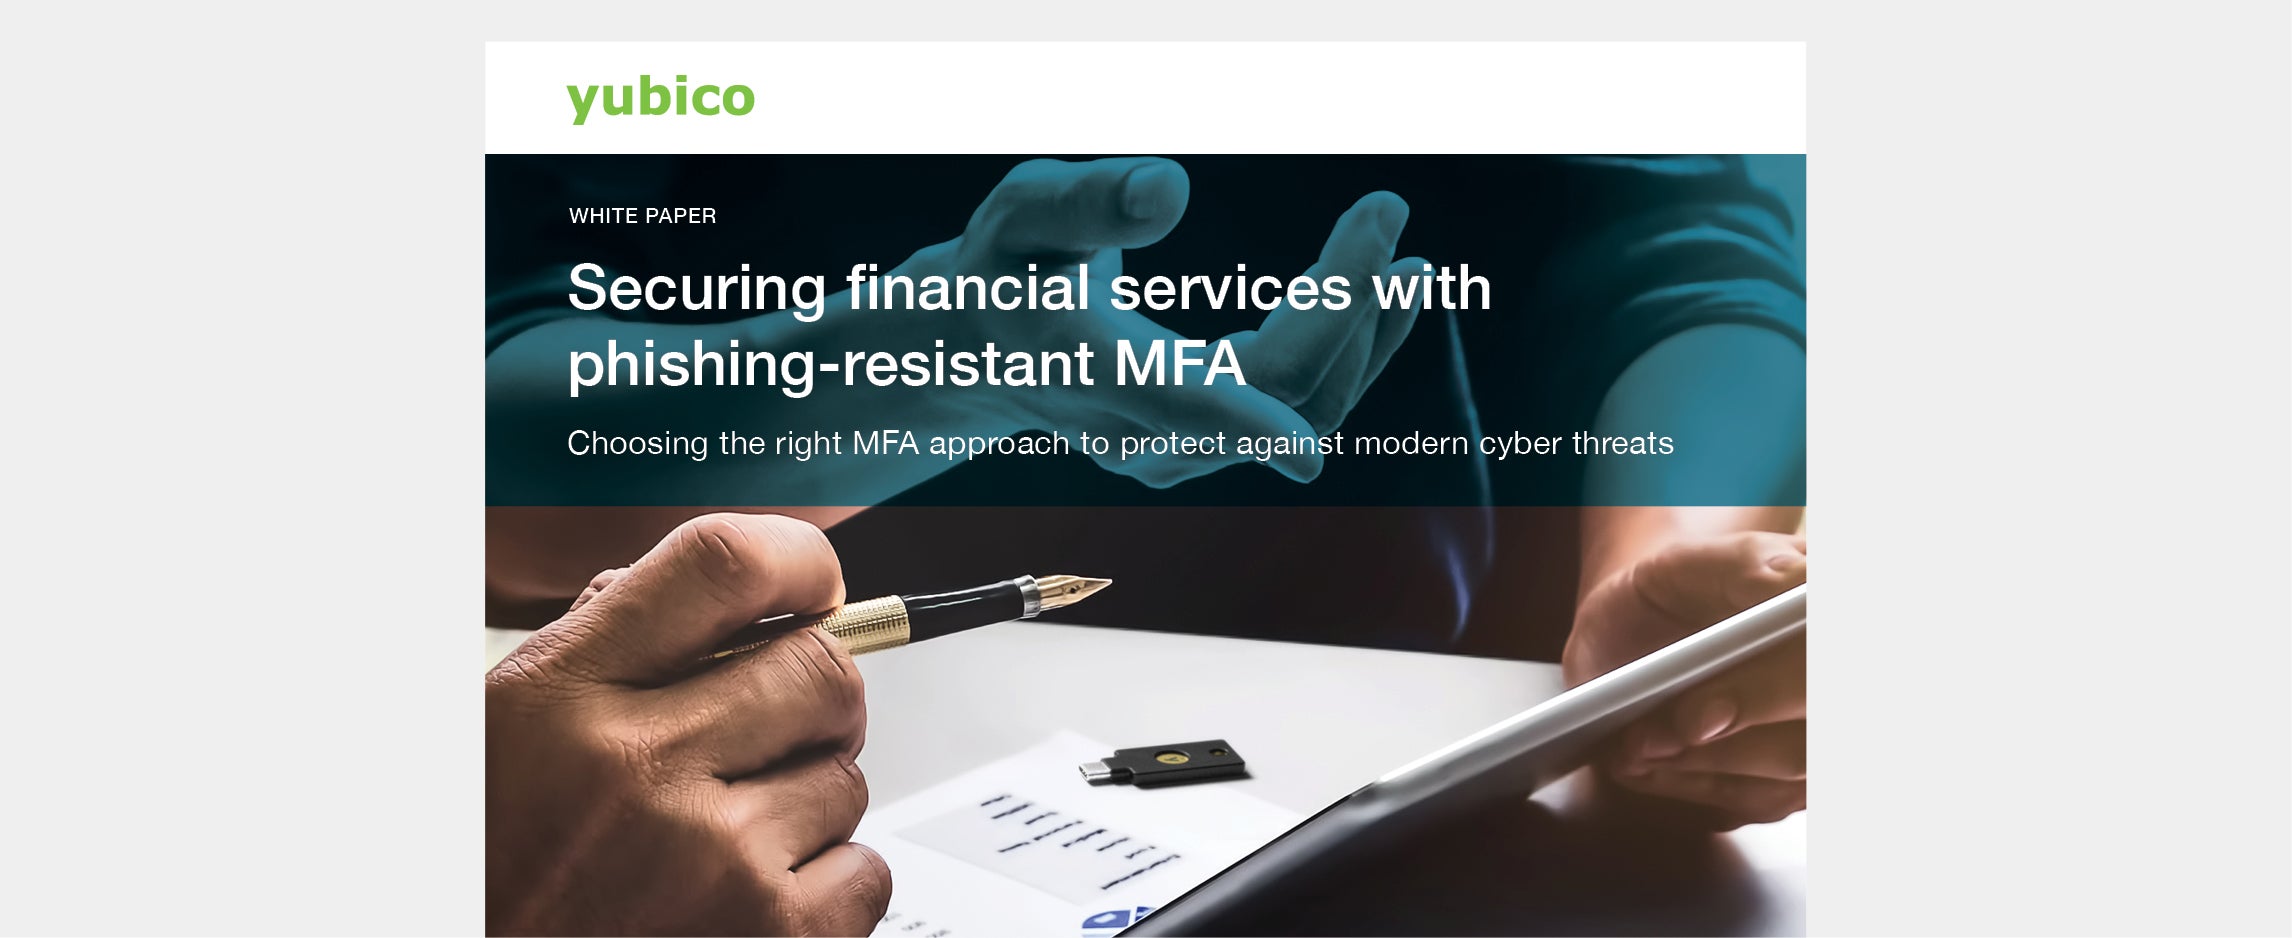 Phishing-resistant MFA for financial services white paper preview